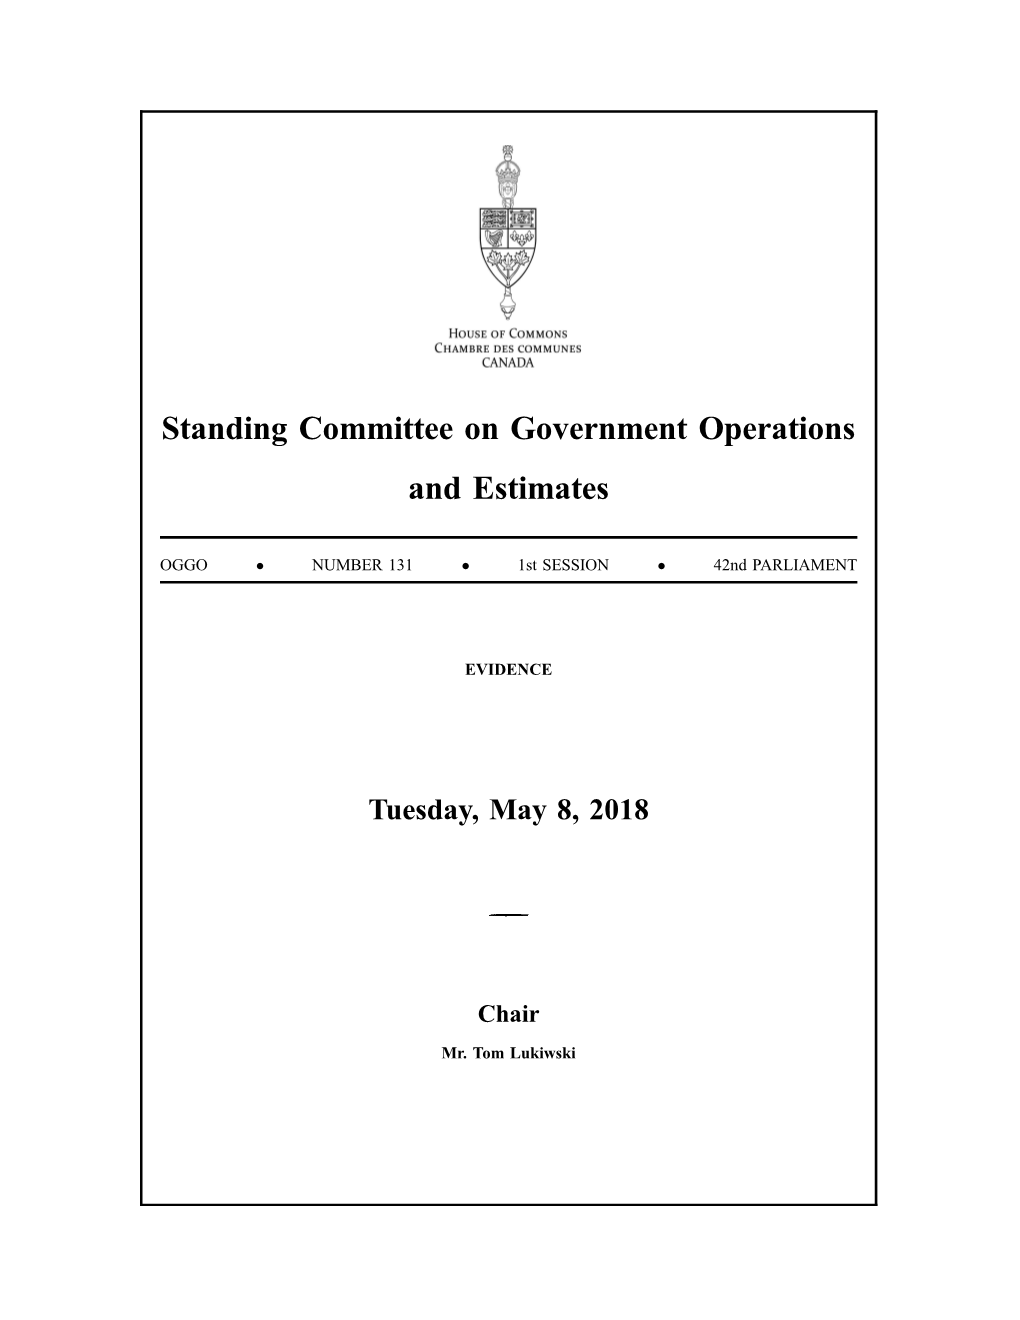 Standing Committee on Government Operations and Estimates